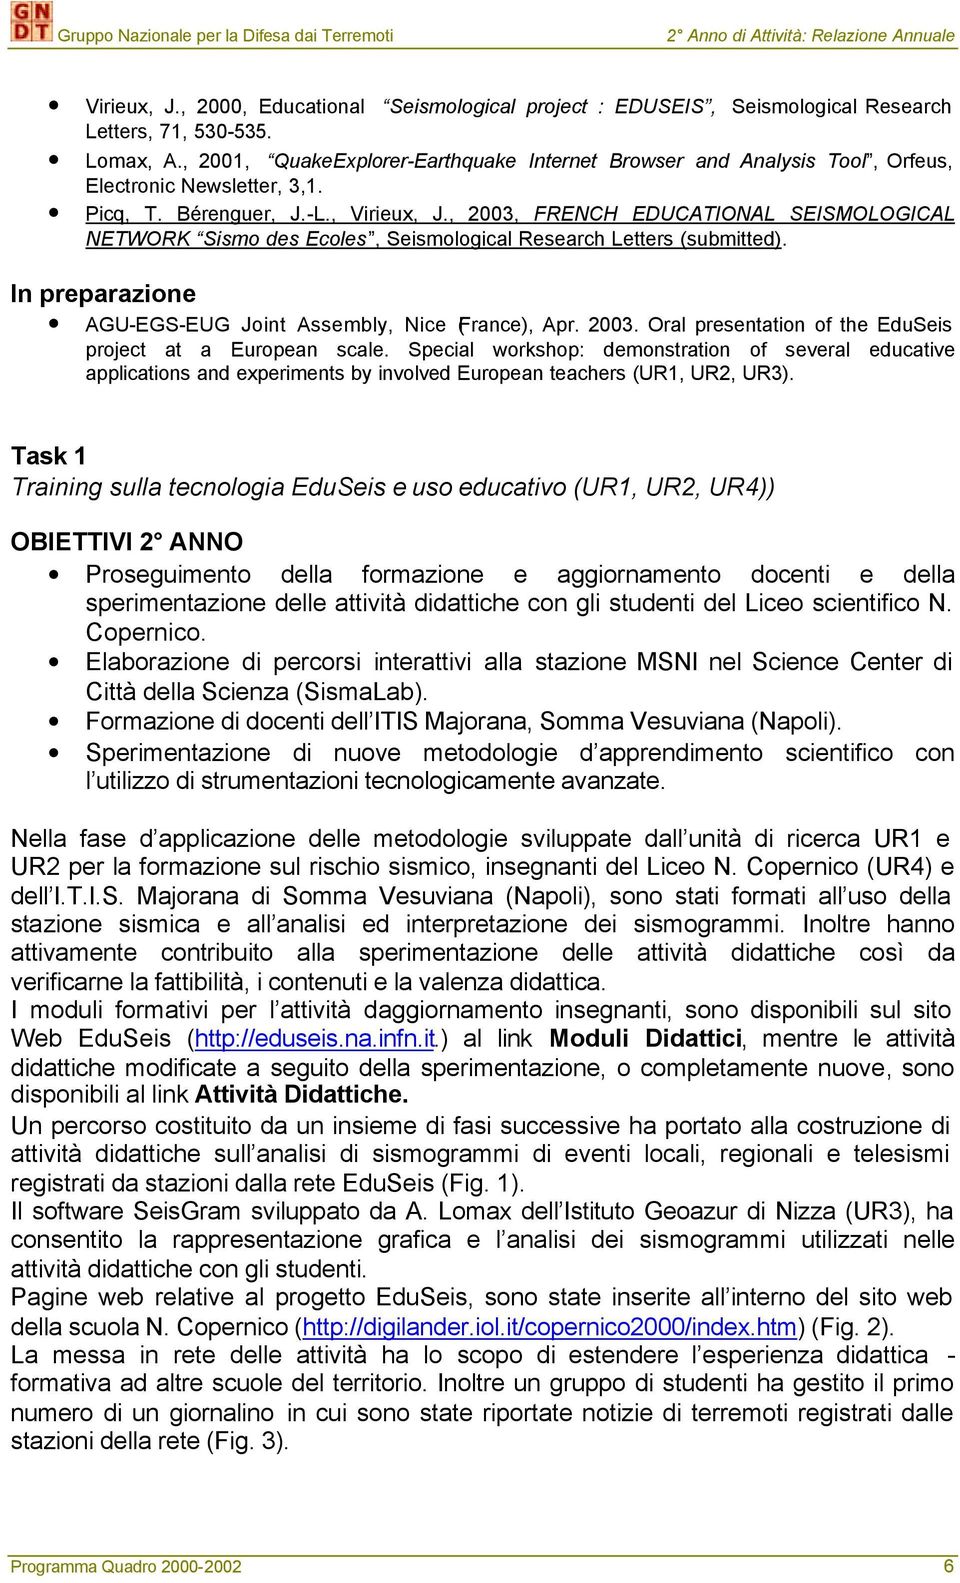 , 2003, FRENCH EDUCATIONAL SEISMOLOGICAL NETWORK Sismo des Ecoles, Seismological Research Letters (submitted). In preparazione AGU-EGS-EUG Joint Assembly, Nice (France), Apr. 2003. Oral presentation of the EduSeis project at a European scale.